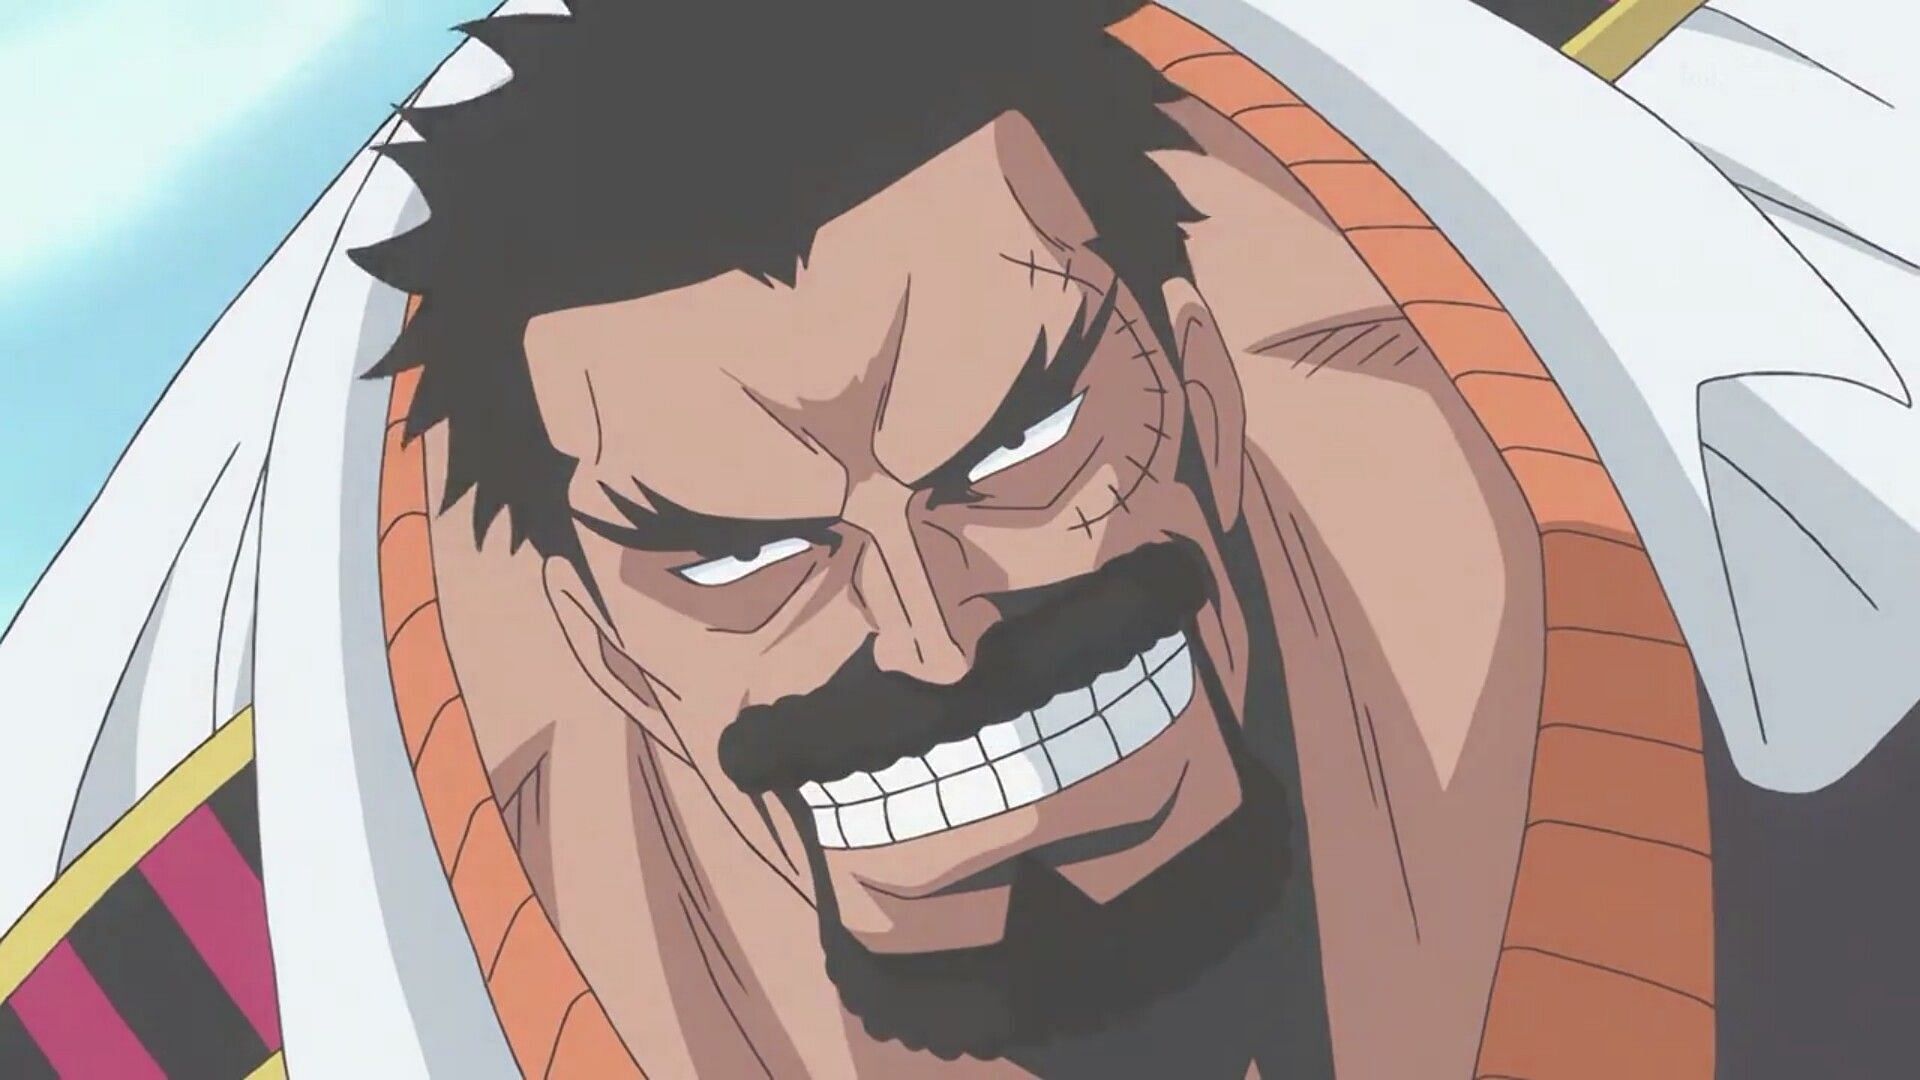 In his prime, Garp was almost as strong as Gol D. Roger, the King of Pirates (Image via Toei Animation, One Piece)